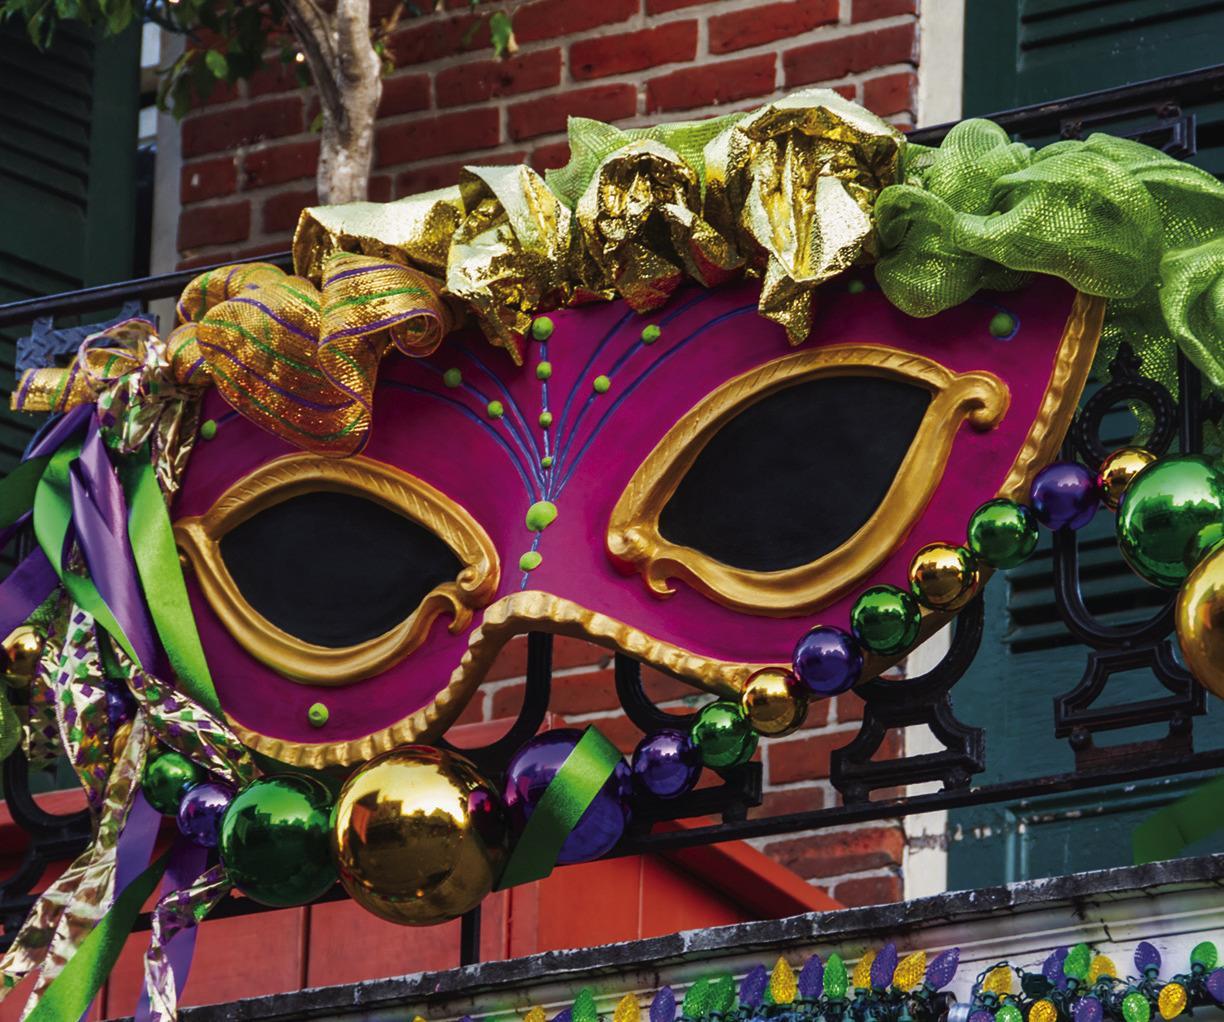 Heritage Society of San Marcos to host Mardi Gras Martini Happy Hour and Silent Auction